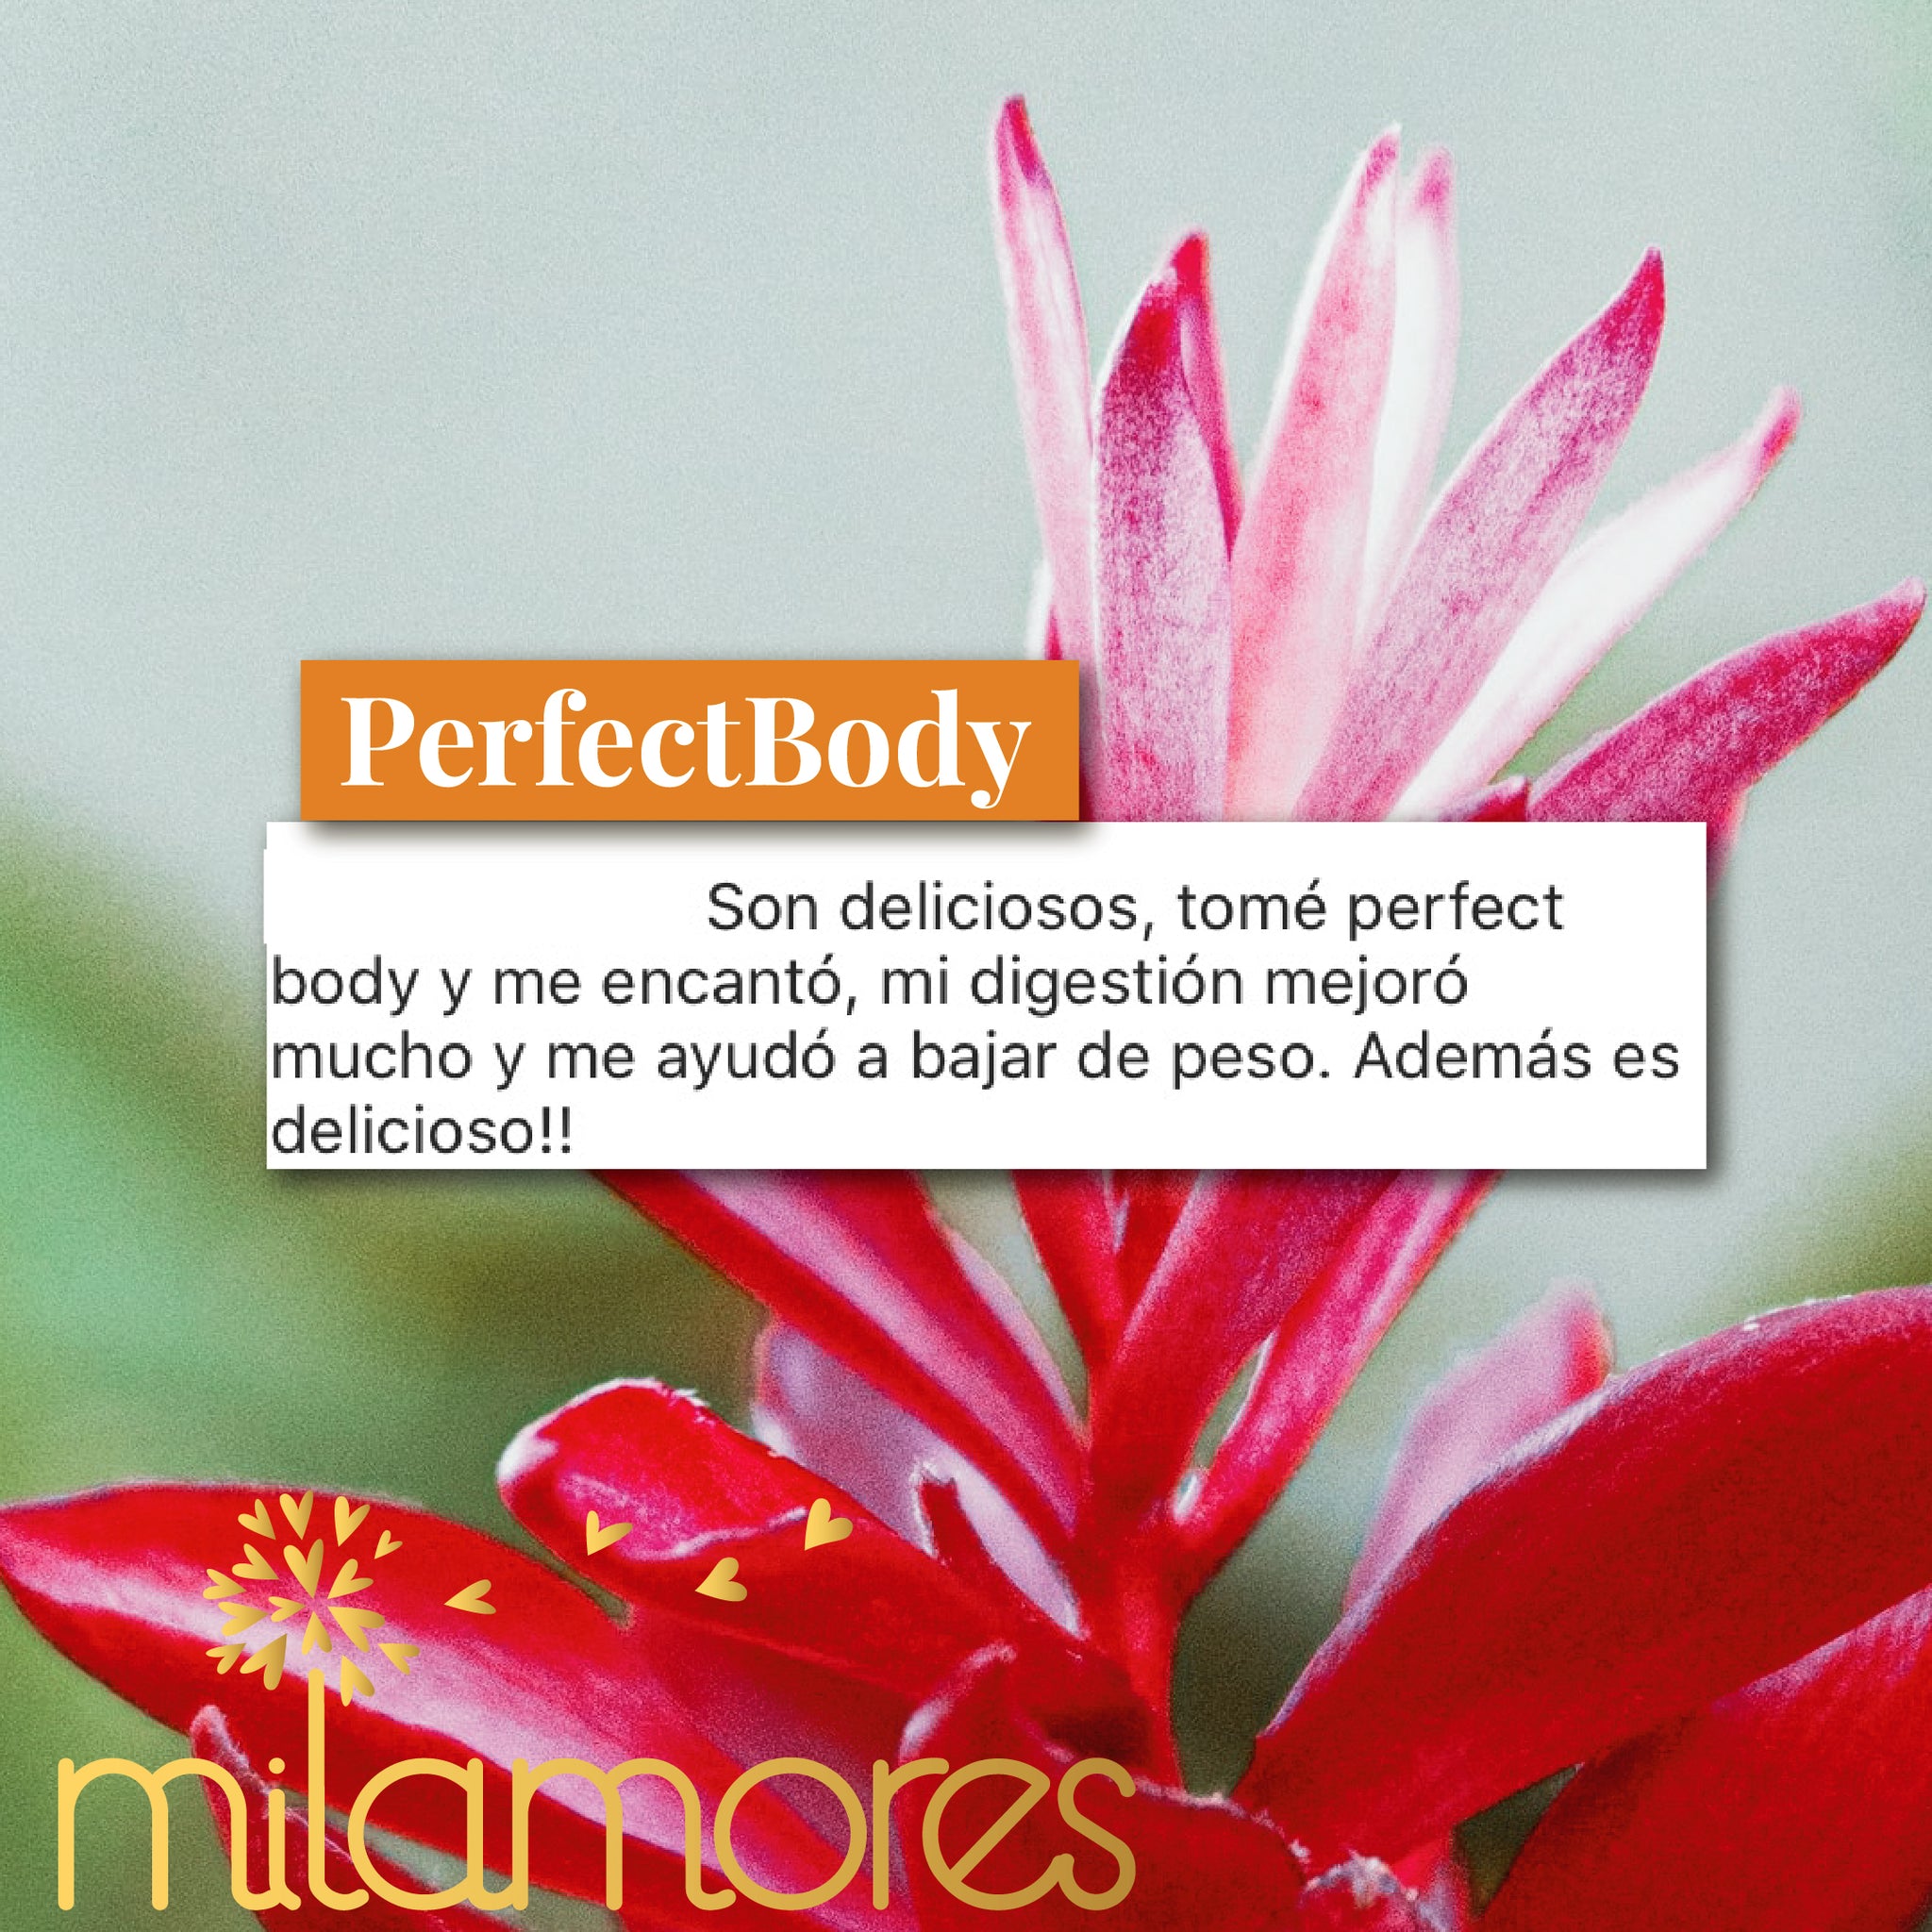 PerfectBody-Milamores-Colombia-Bajardepeso